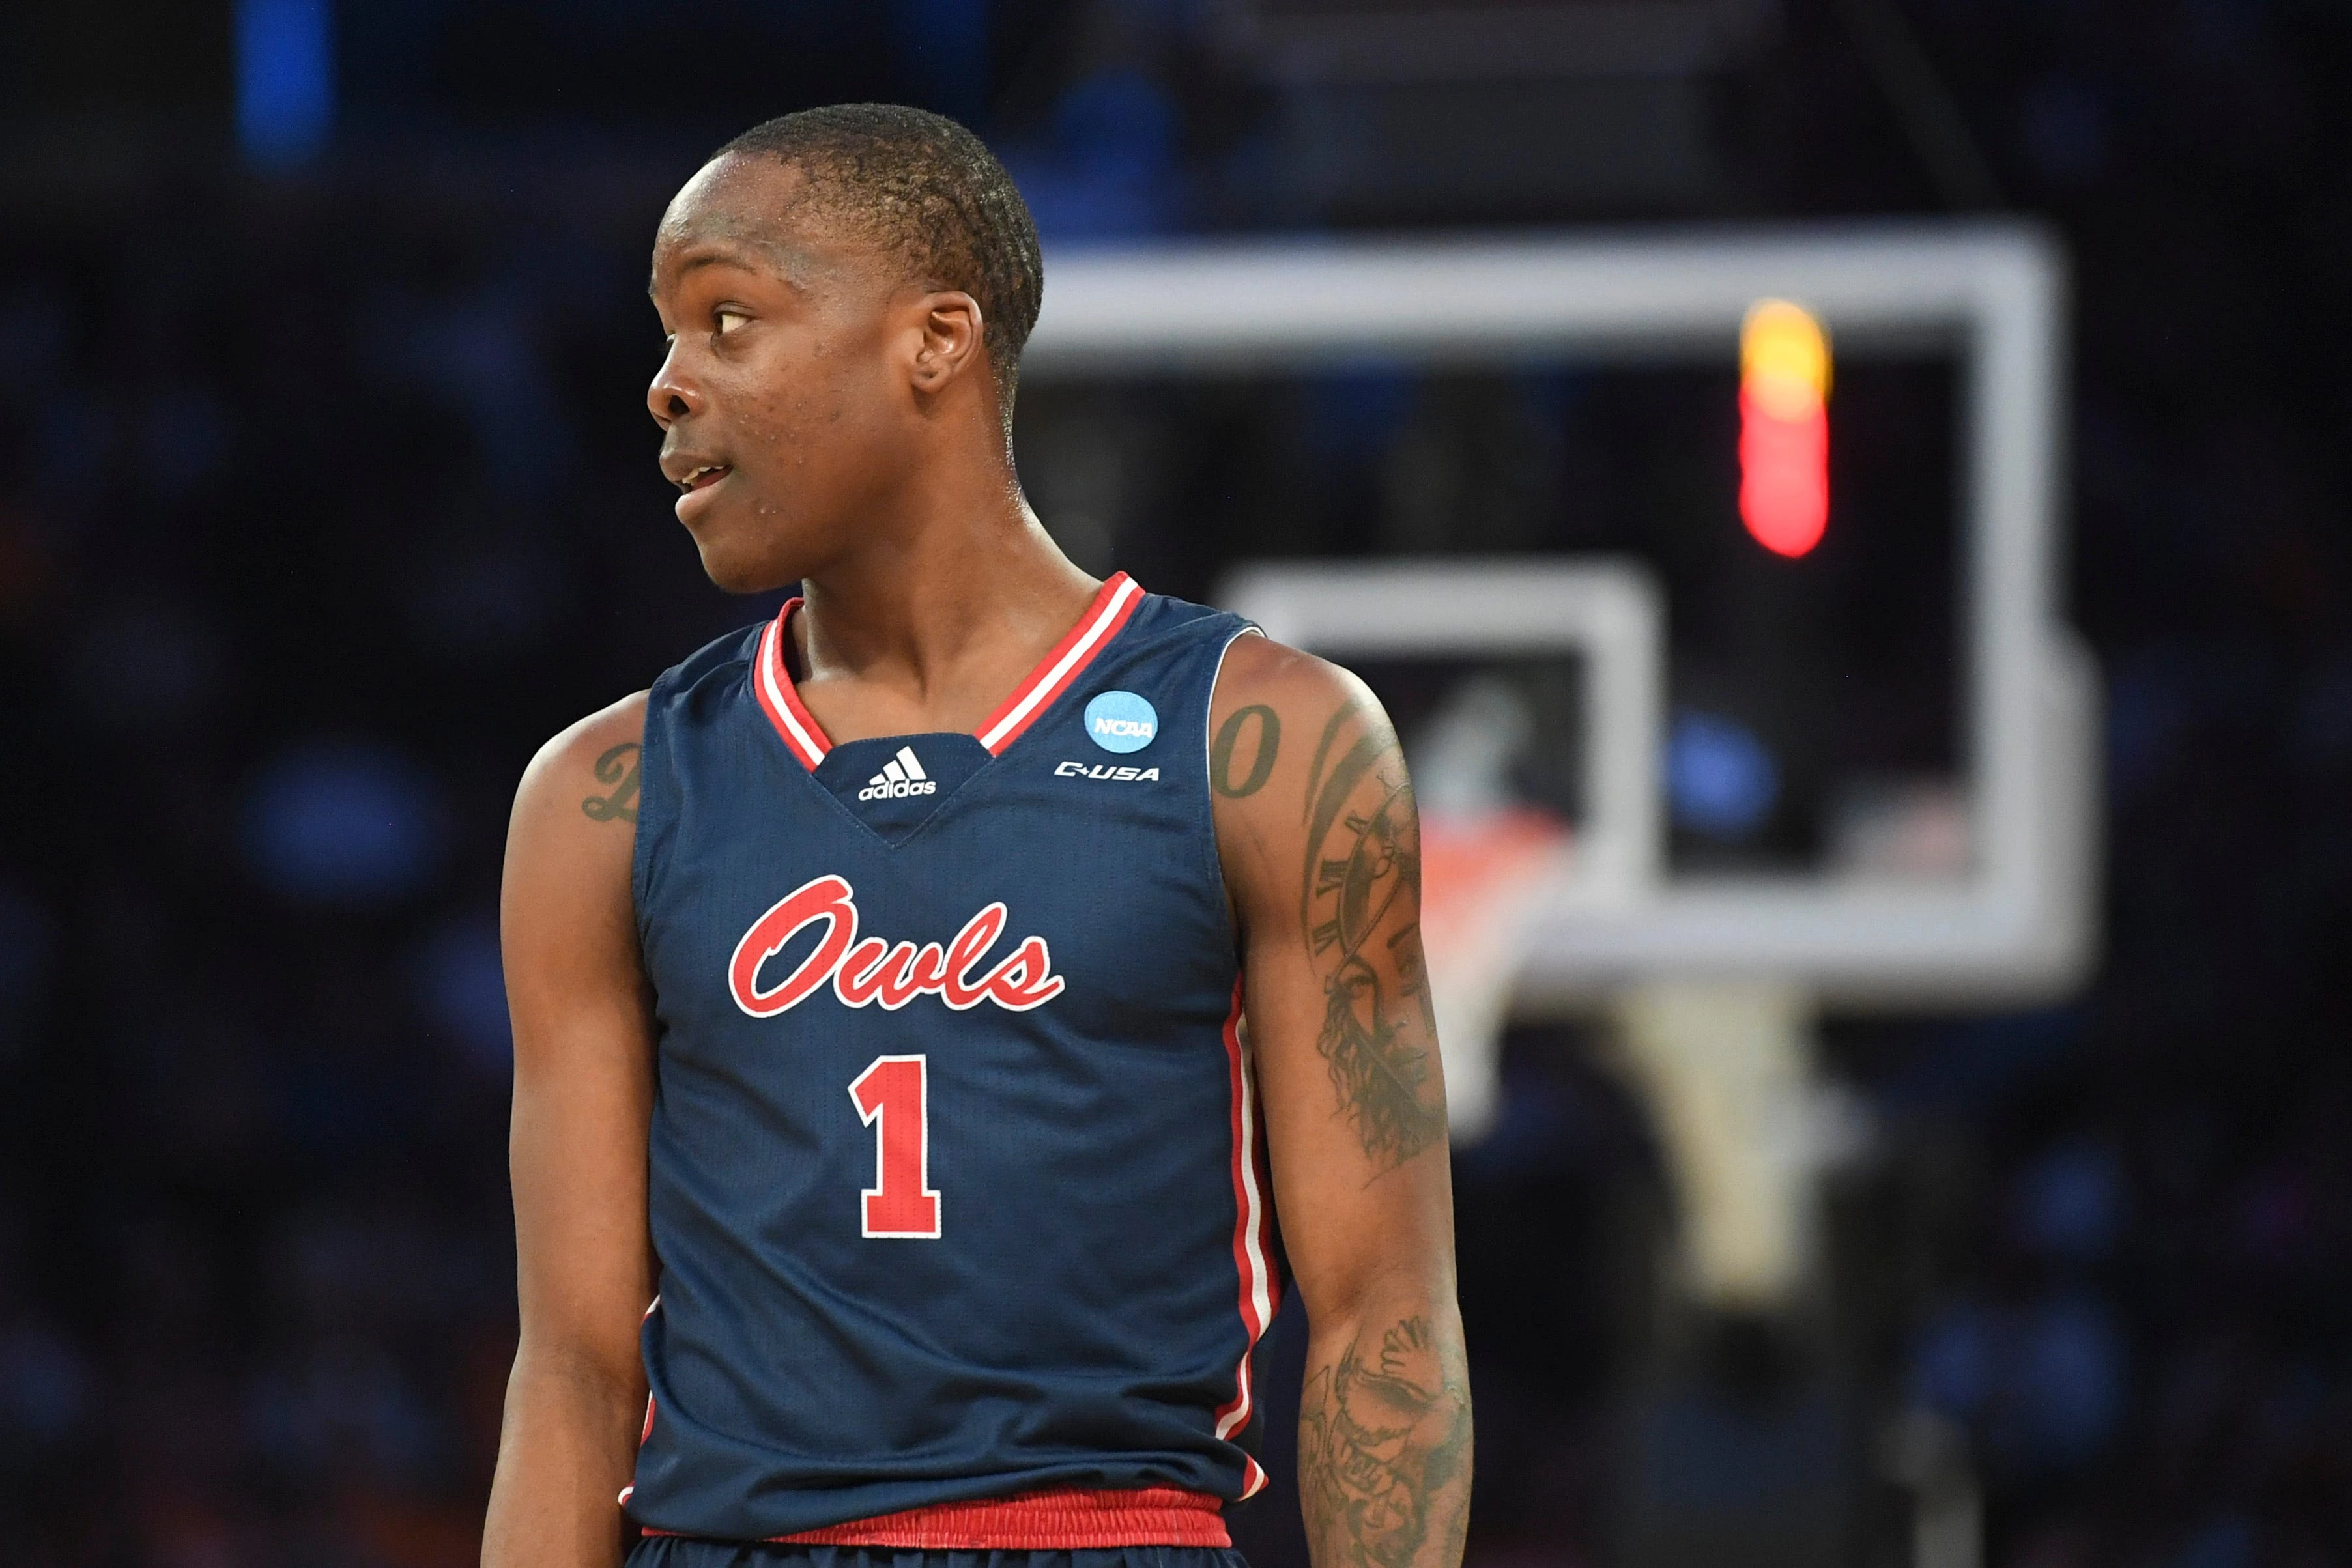 Florida Atlantic University guard Johnell Davis (1) is seen on the court during a NCAA Tournament Sweet 16 game between Tennessee and FAU in Madison Square Garden, Thursday, March 23, 2023.